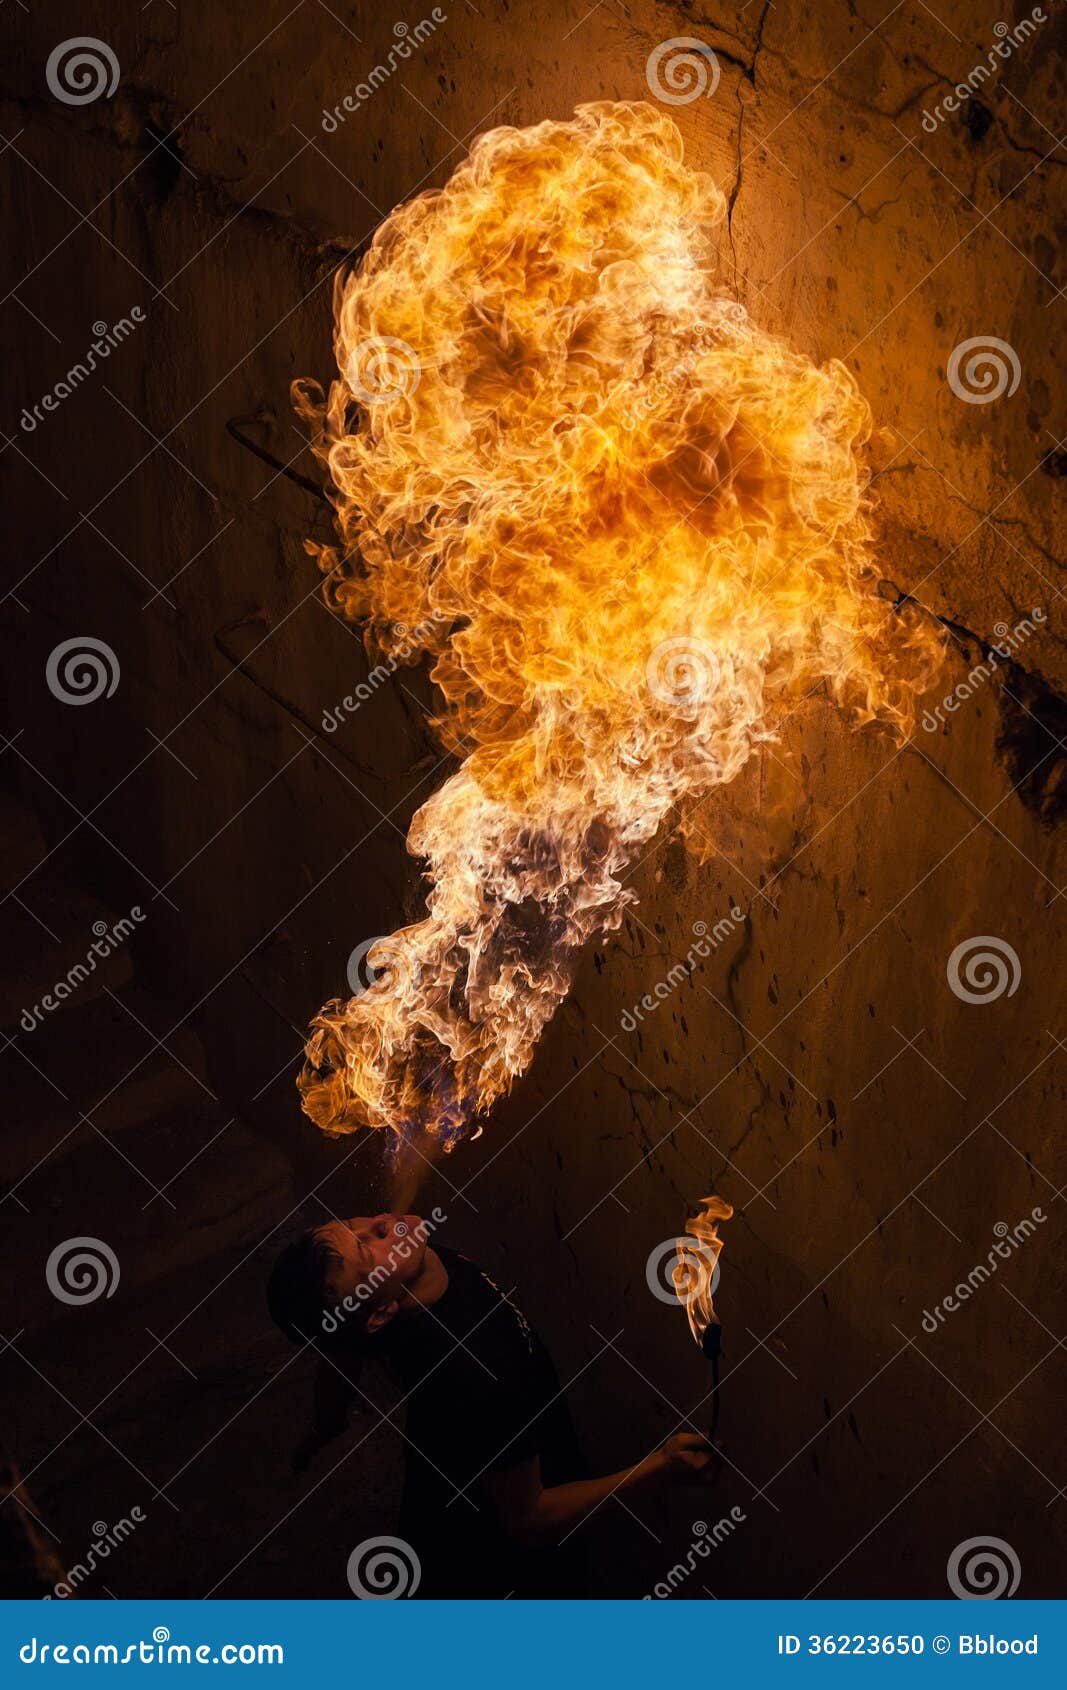 Young man blowing fire from his mouth. Fire artist blowing fire from his mouth